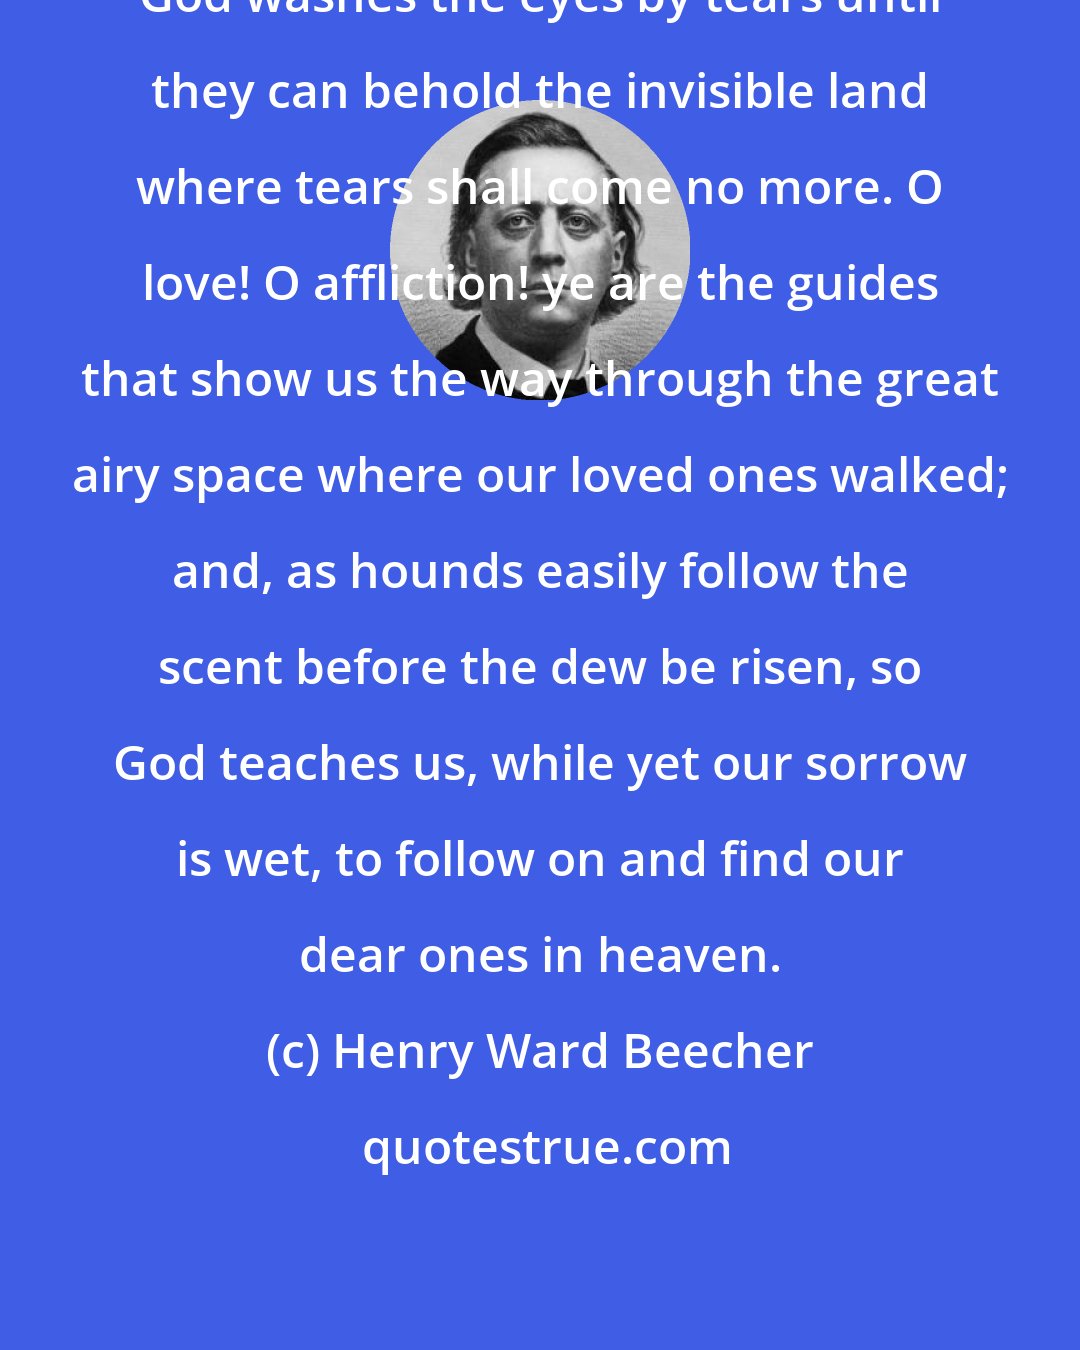 Henry Ward Beecher: God washes the eyes by tears until they can behold the invisible land where tears shall come no more. O love! O affliction! ye are the guides that show us the way through the great airy space where our loved ones walked; and, as hounds easily follow the scent before the dew be risen, so God teaches us, while yet our sorrow is wet, to follow on and find our dear ones in heaven.